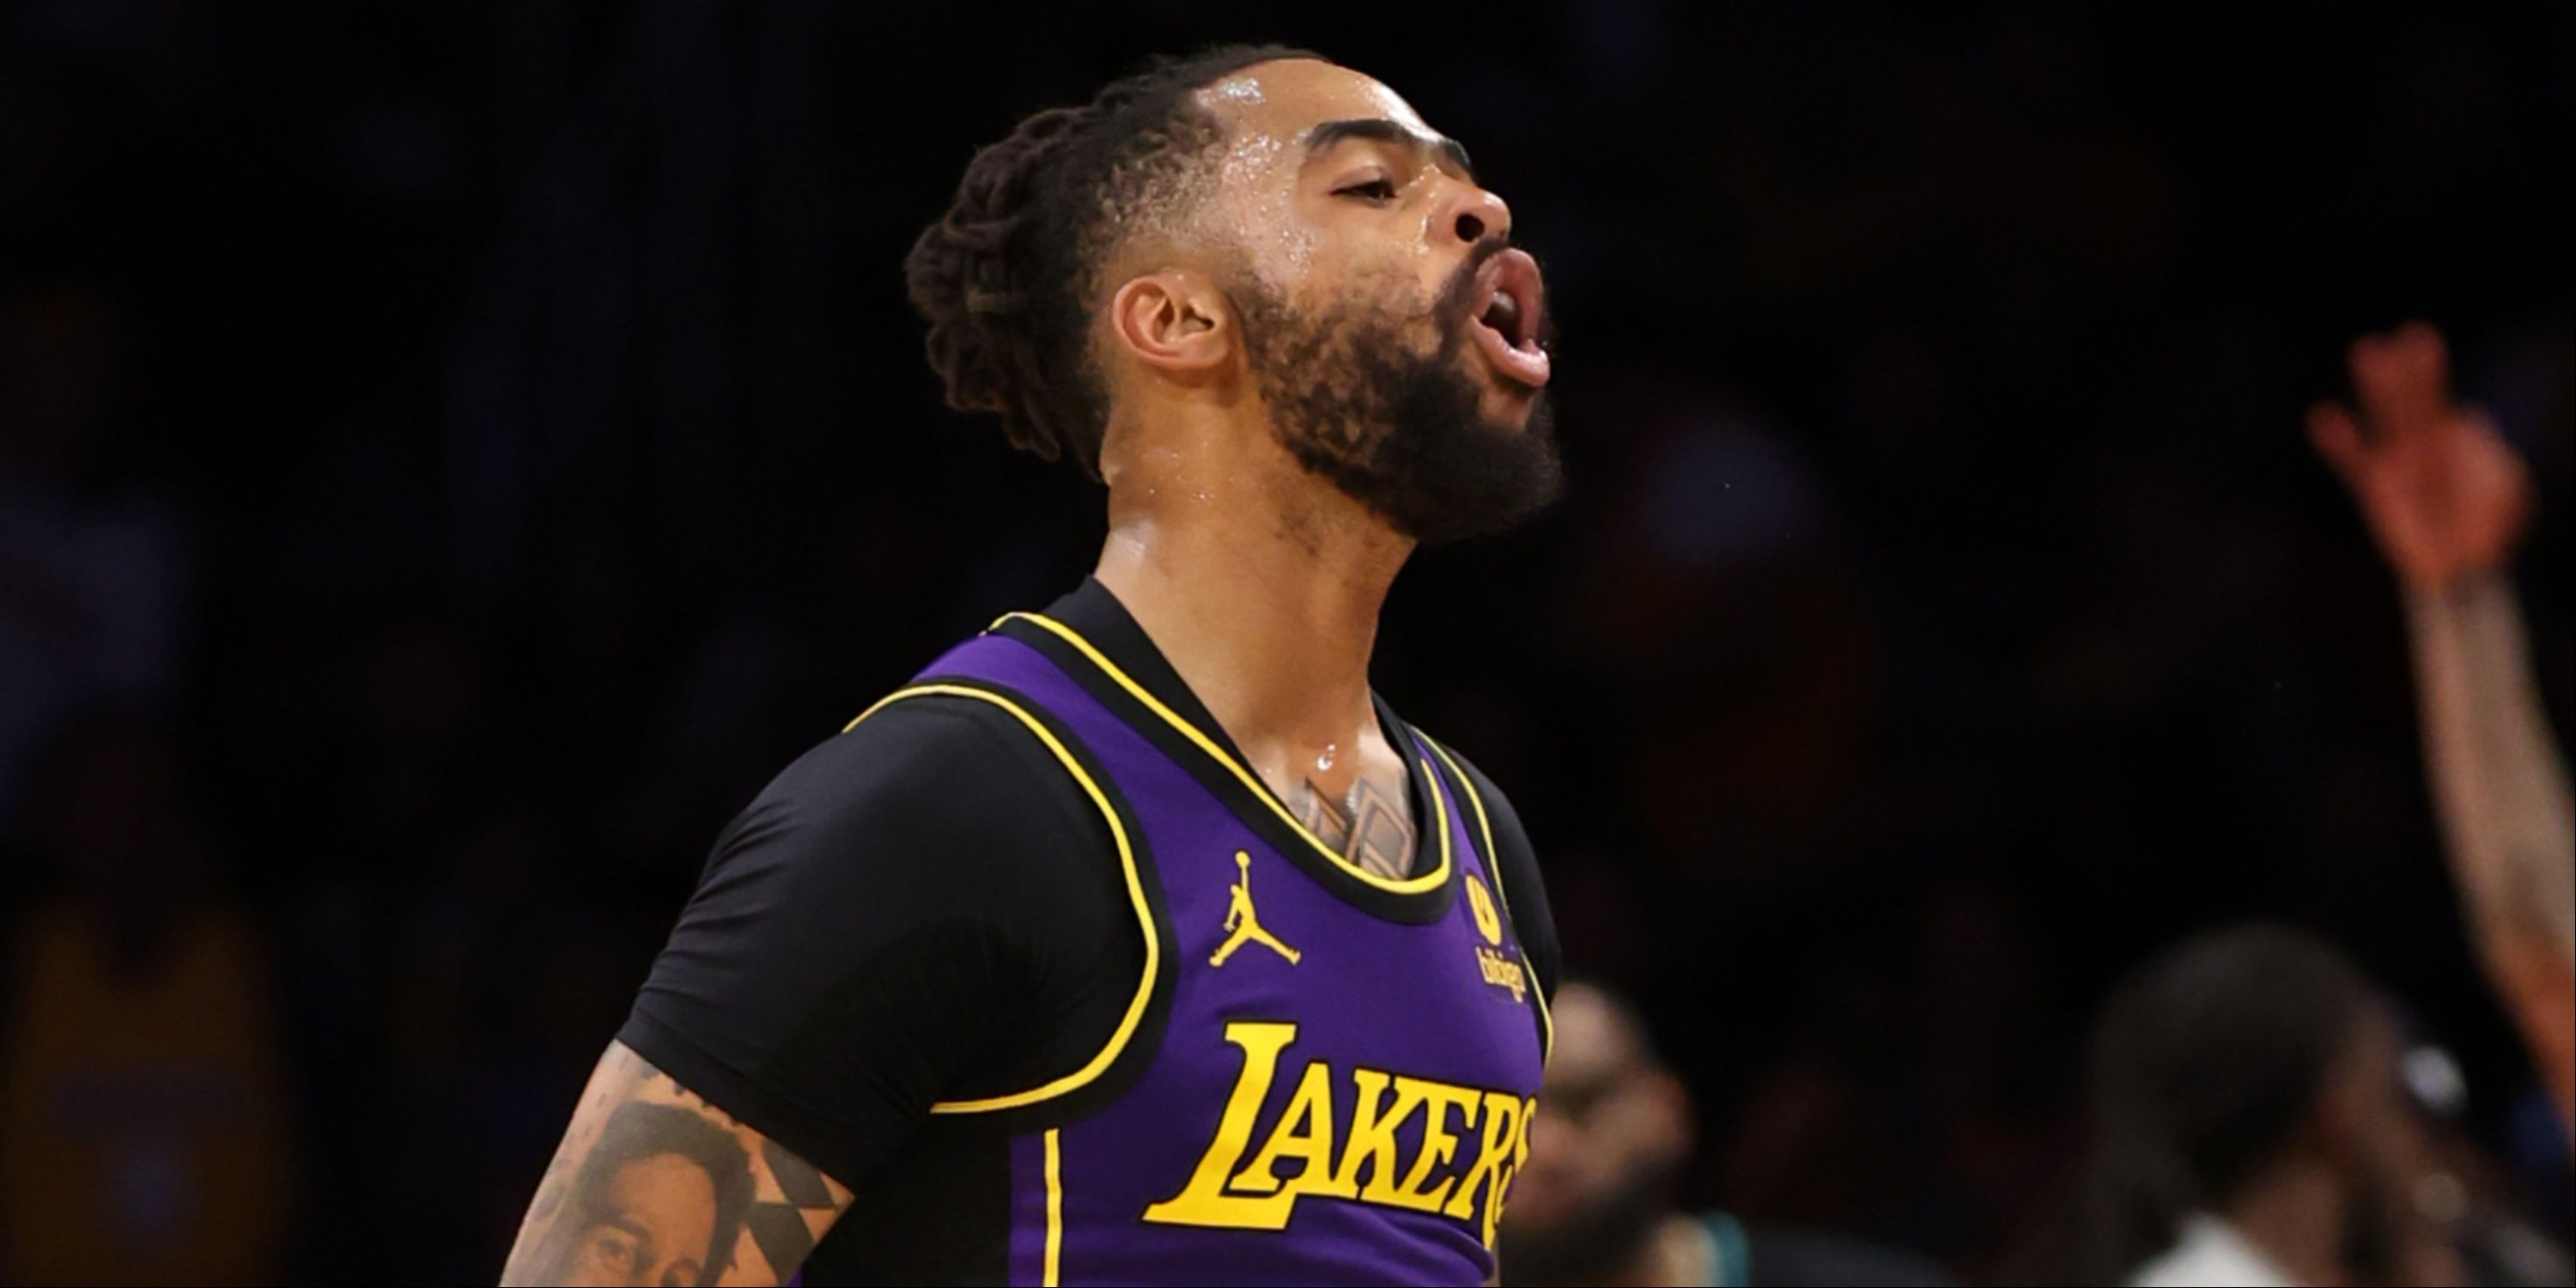 D'Angelo Russell Los Angeles Lakers